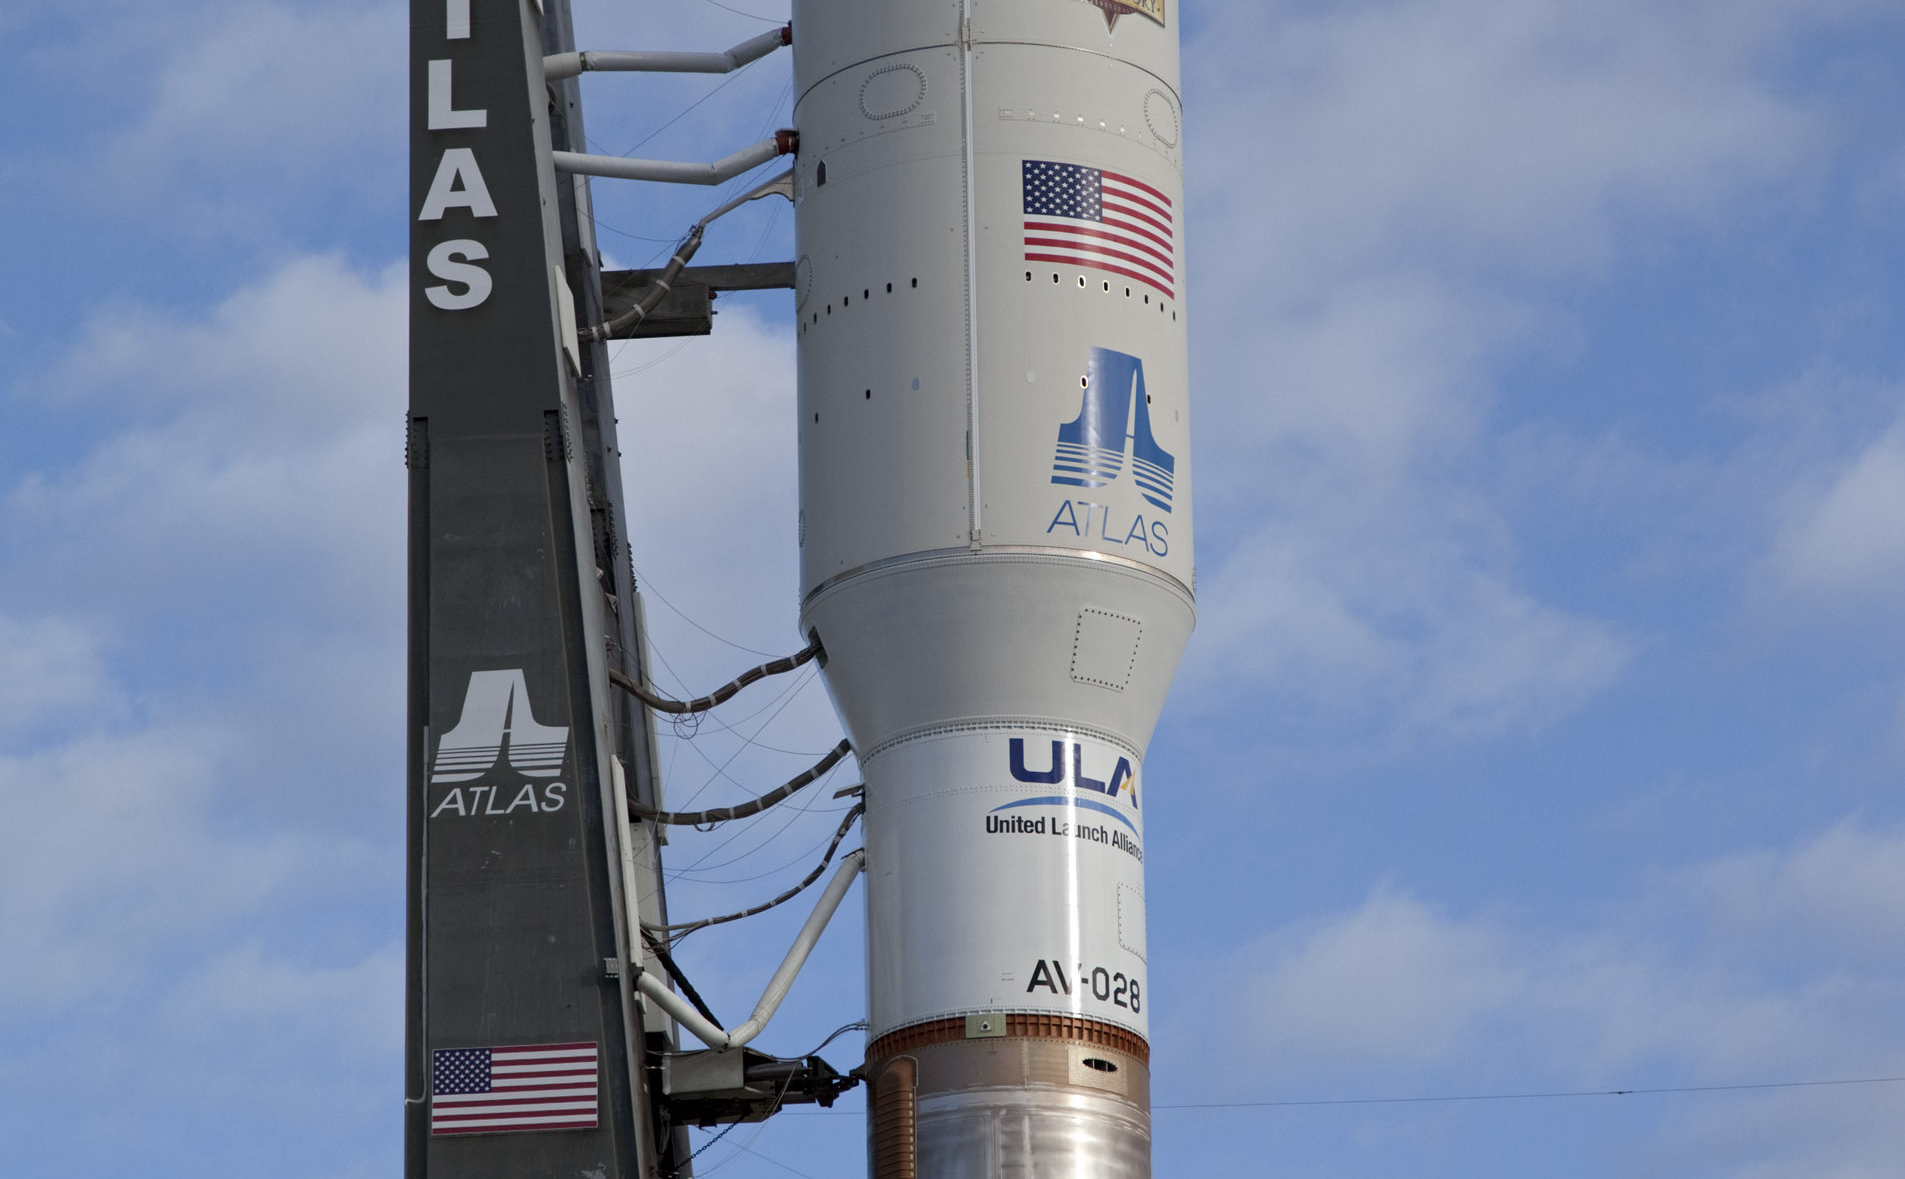 On Cape Canaveral Air Force Station in Florida, the payload fairing protecting NASA's Mars Science Laboratory (MSL) stands atop the 197-foot-tall United Launch Alliance Atlas V rocket during rollout to the launch pad at Space Launch Complex 41.